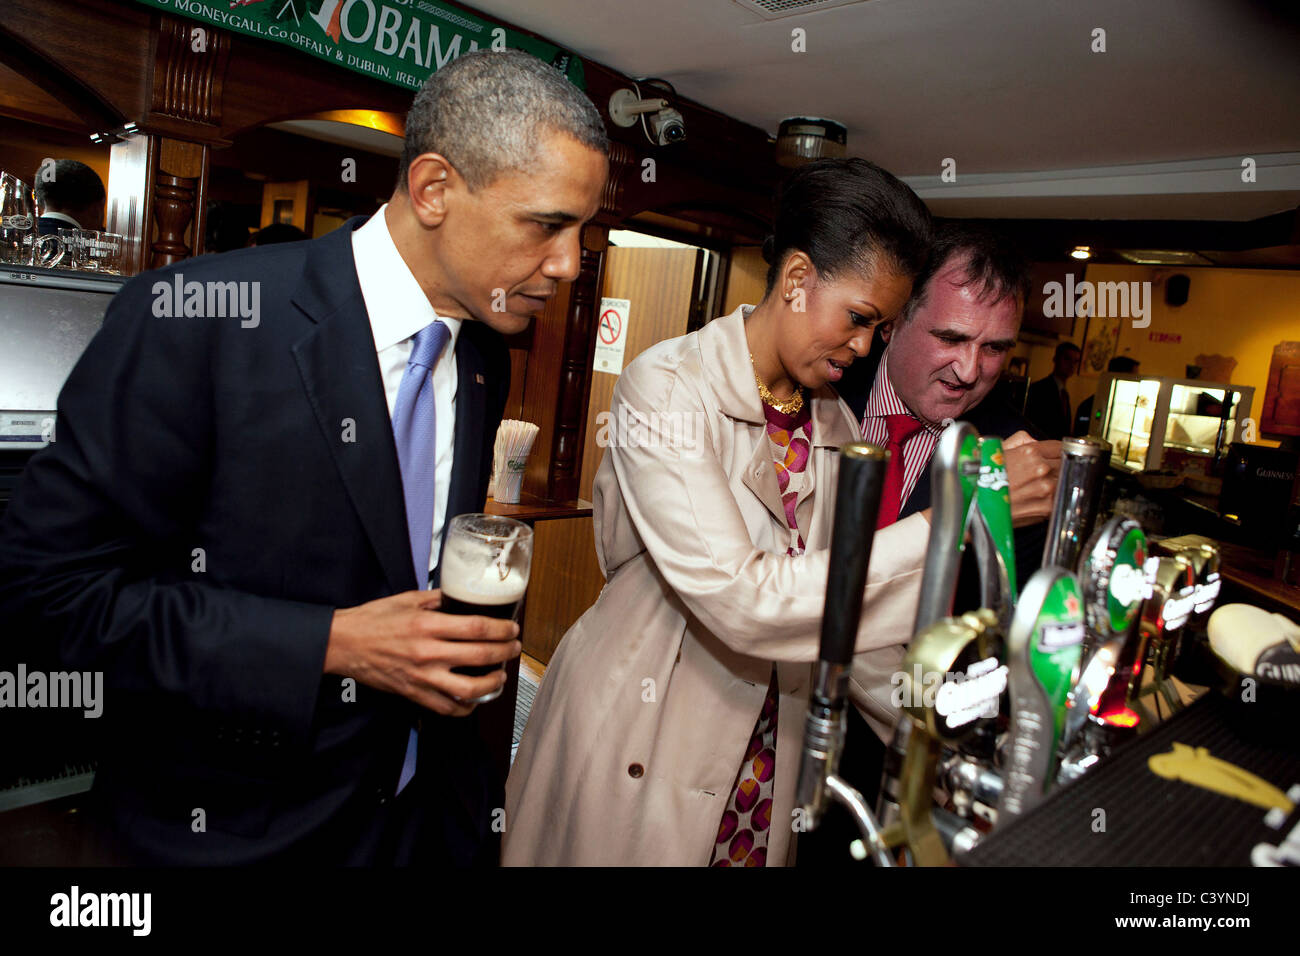 President Barack Obama watches as First Lady Michelle Obama draws a pint at Ollie Hayes’ Pub in Moneygall, Ireland, May 23, 2011 Stock Photo